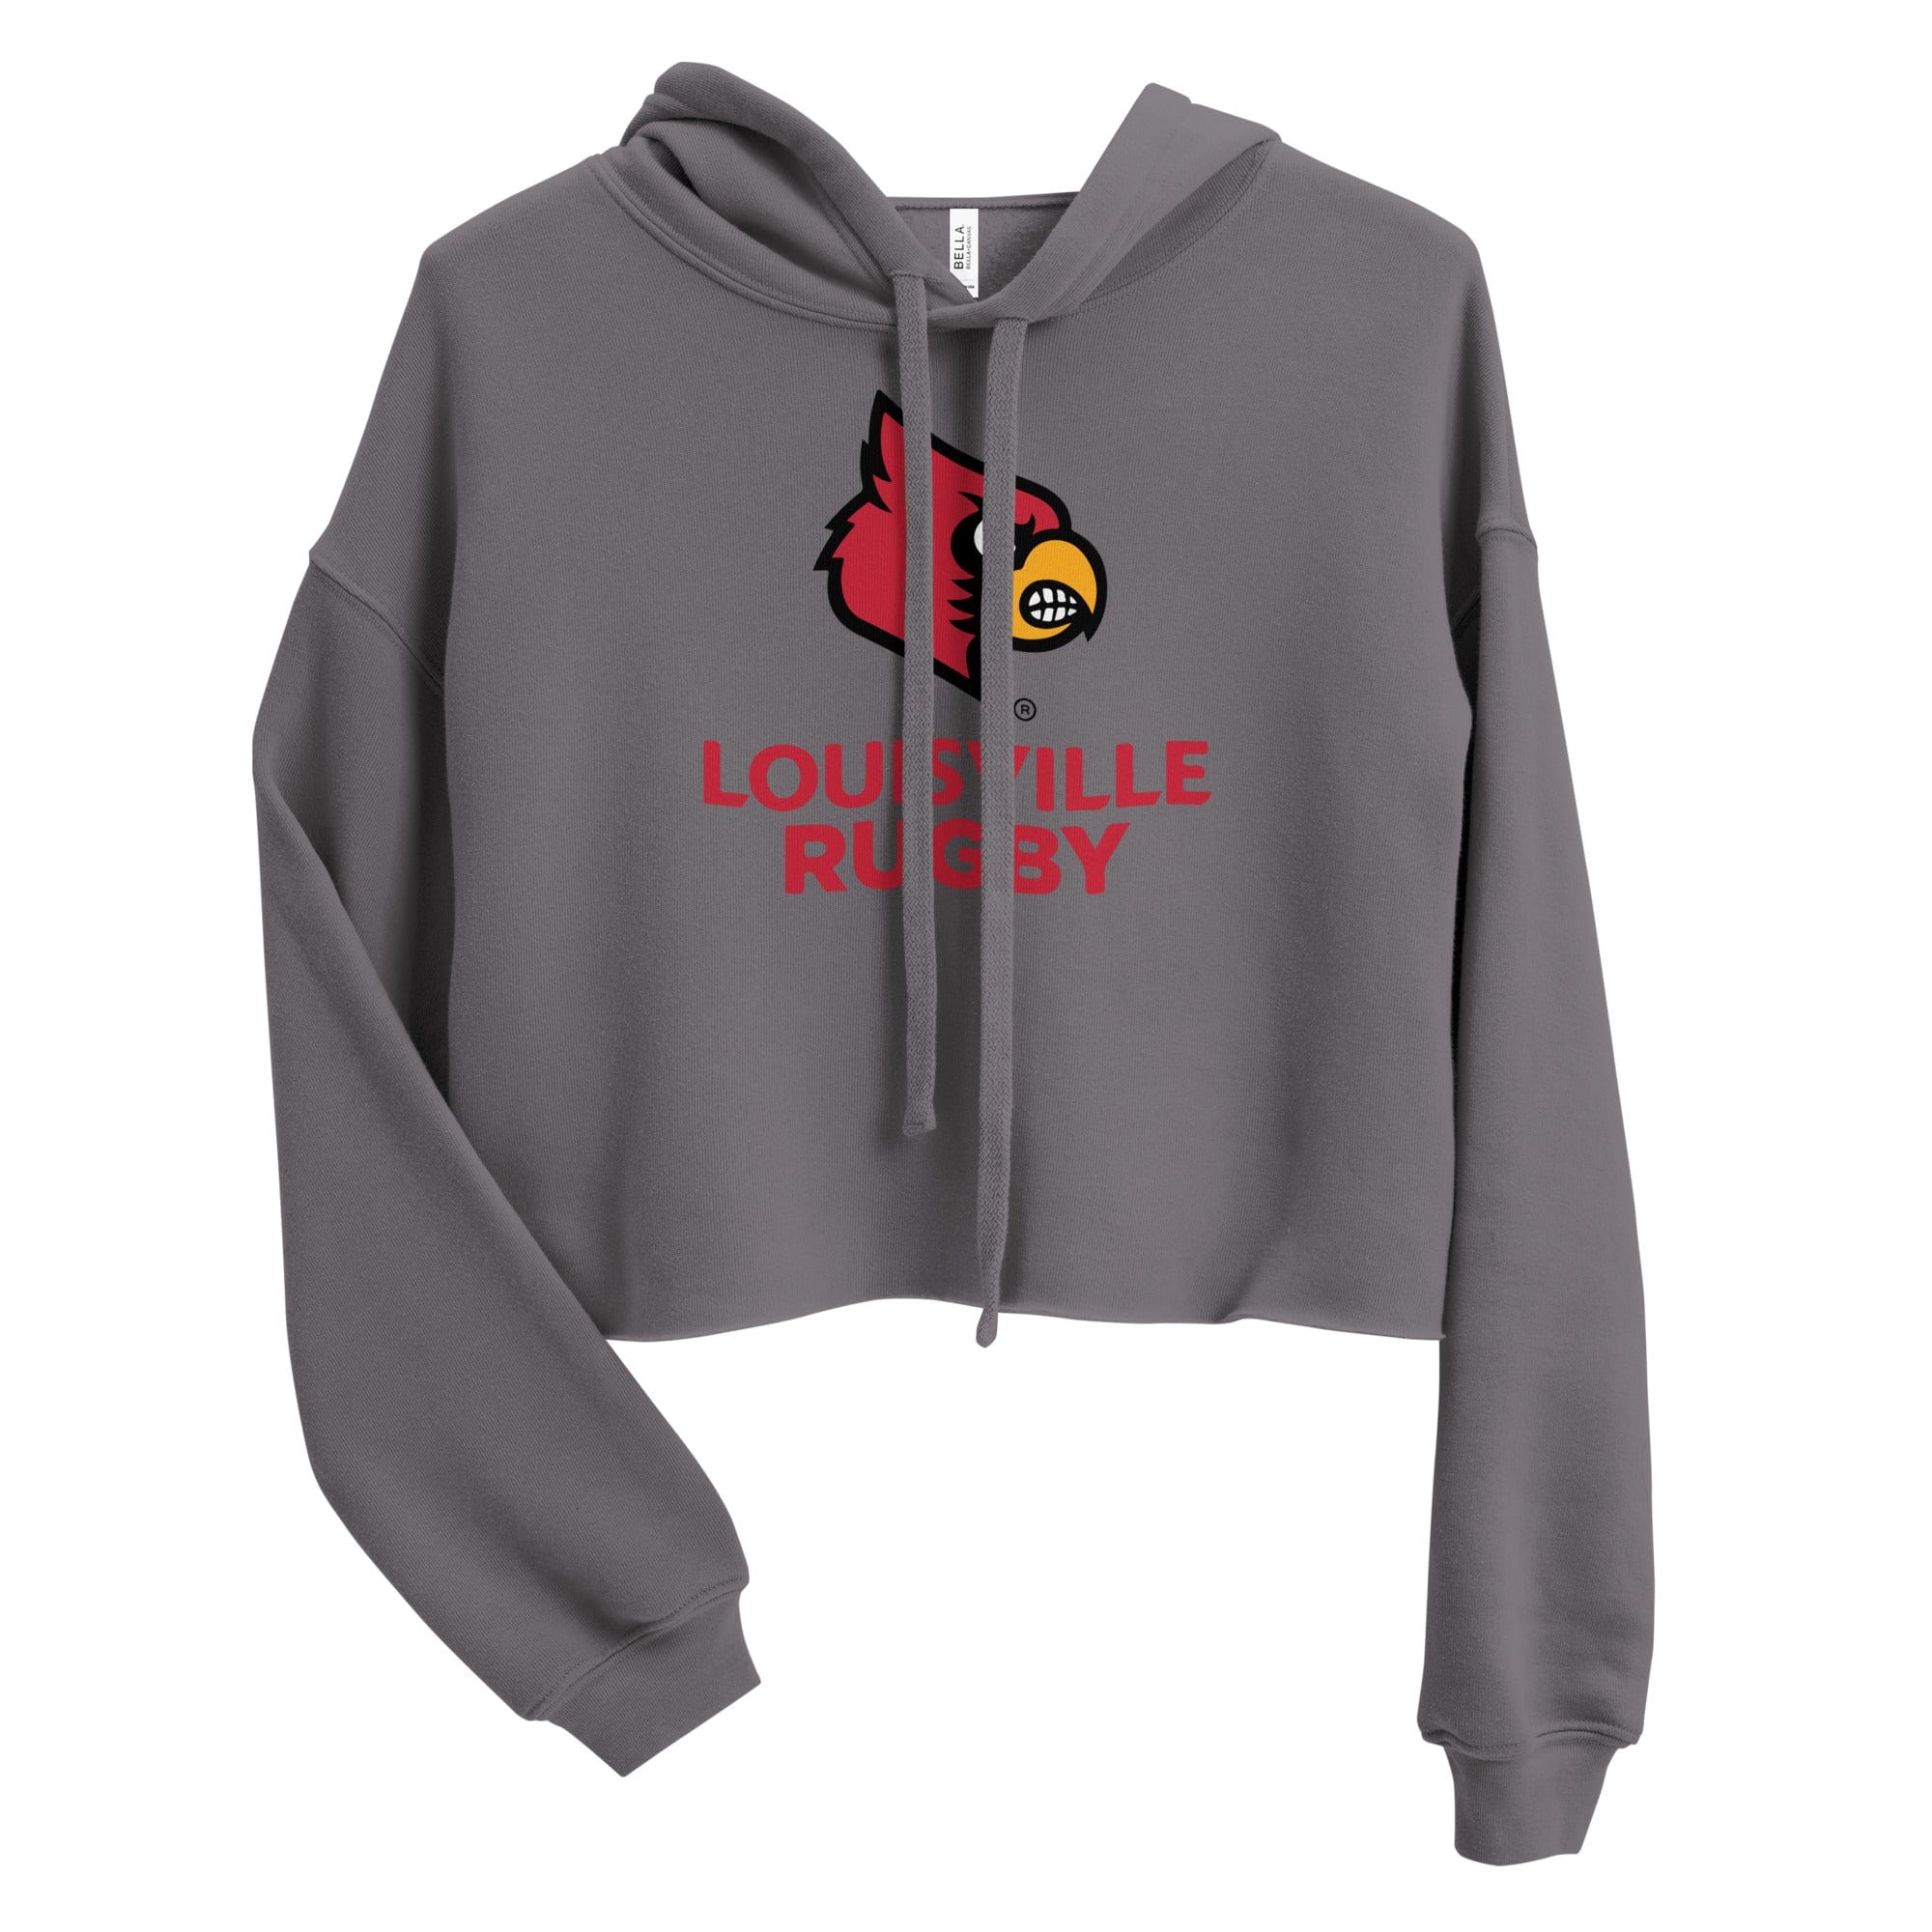 University of Louisville Rugby Women's Cropped Hoodie - World